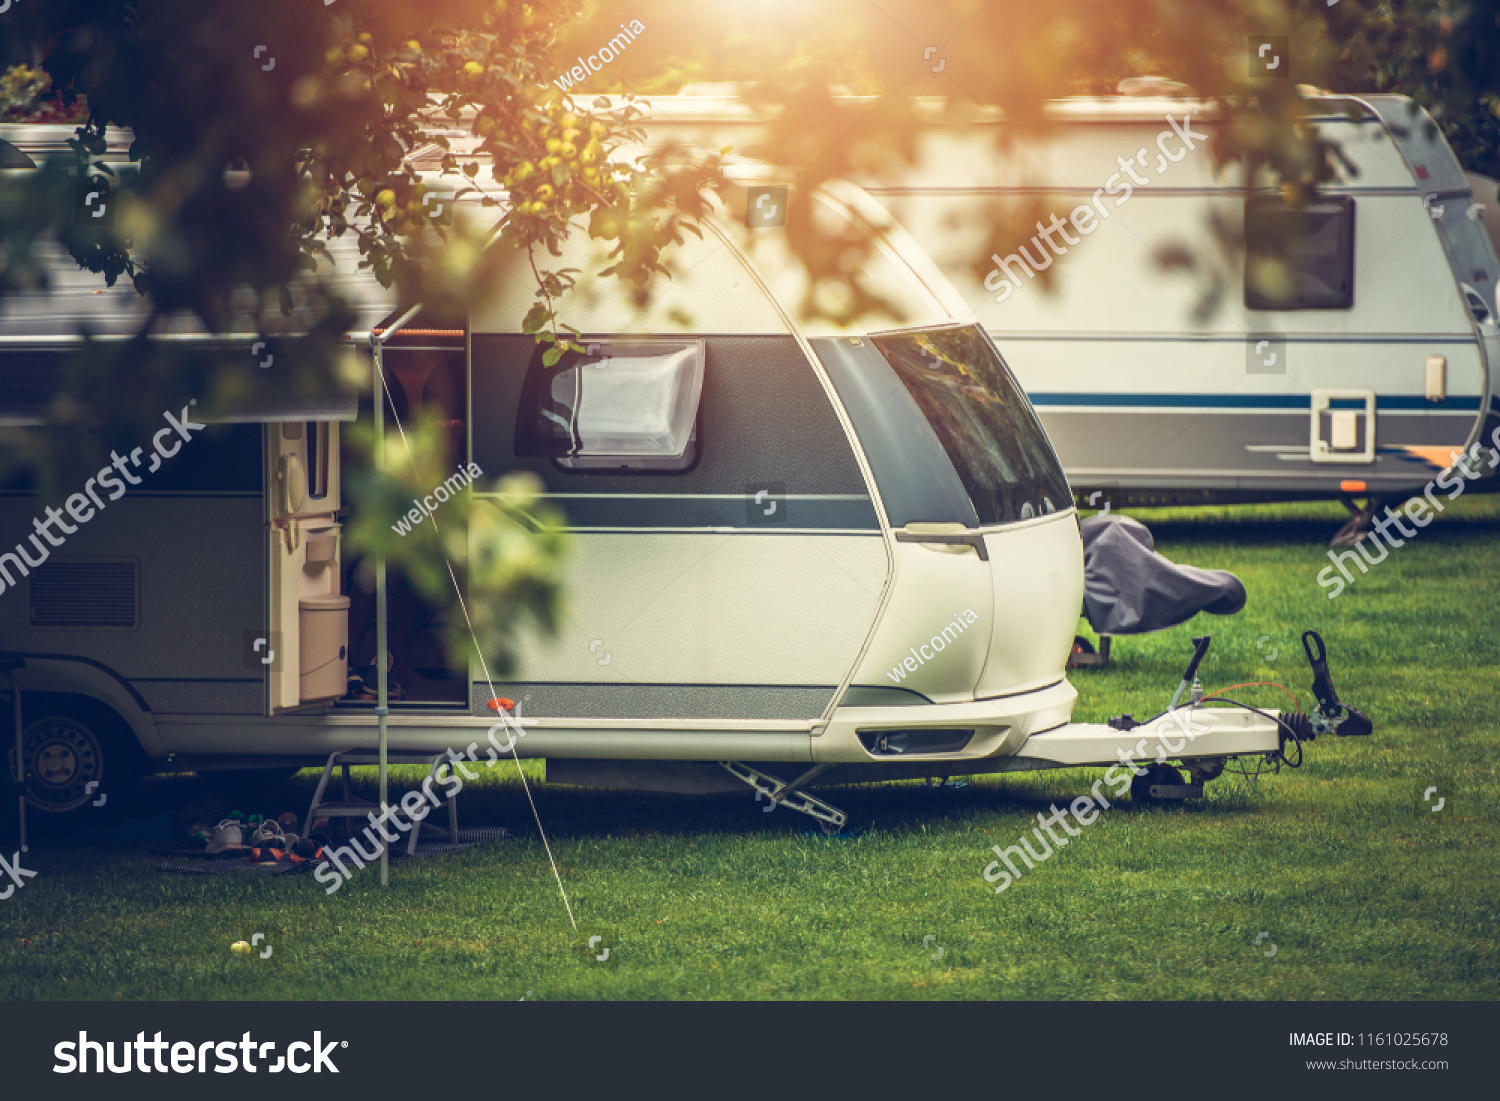 Recreational Vehicle Camping. Vacation in a Travel Trailer. RV Theme. #1161025678